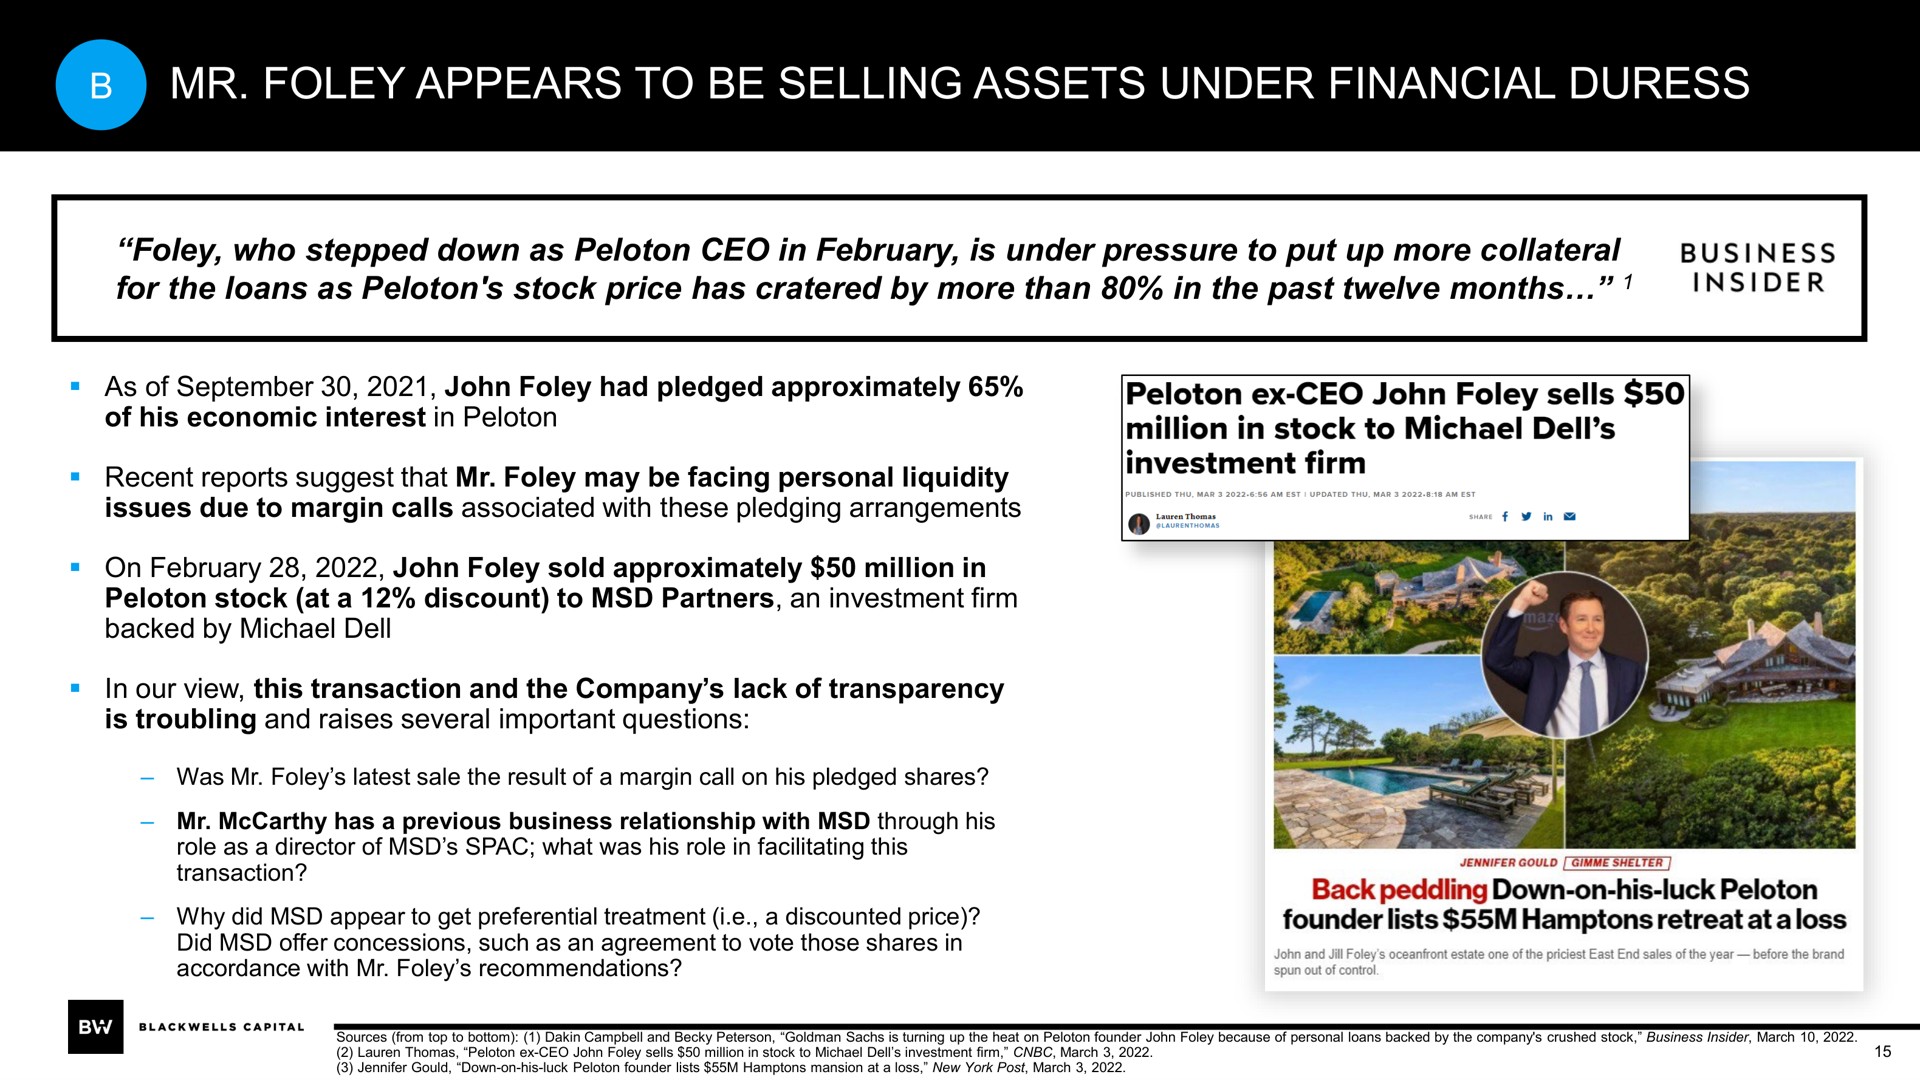 appears to be selling assets under financial duress | Blackwells Capital